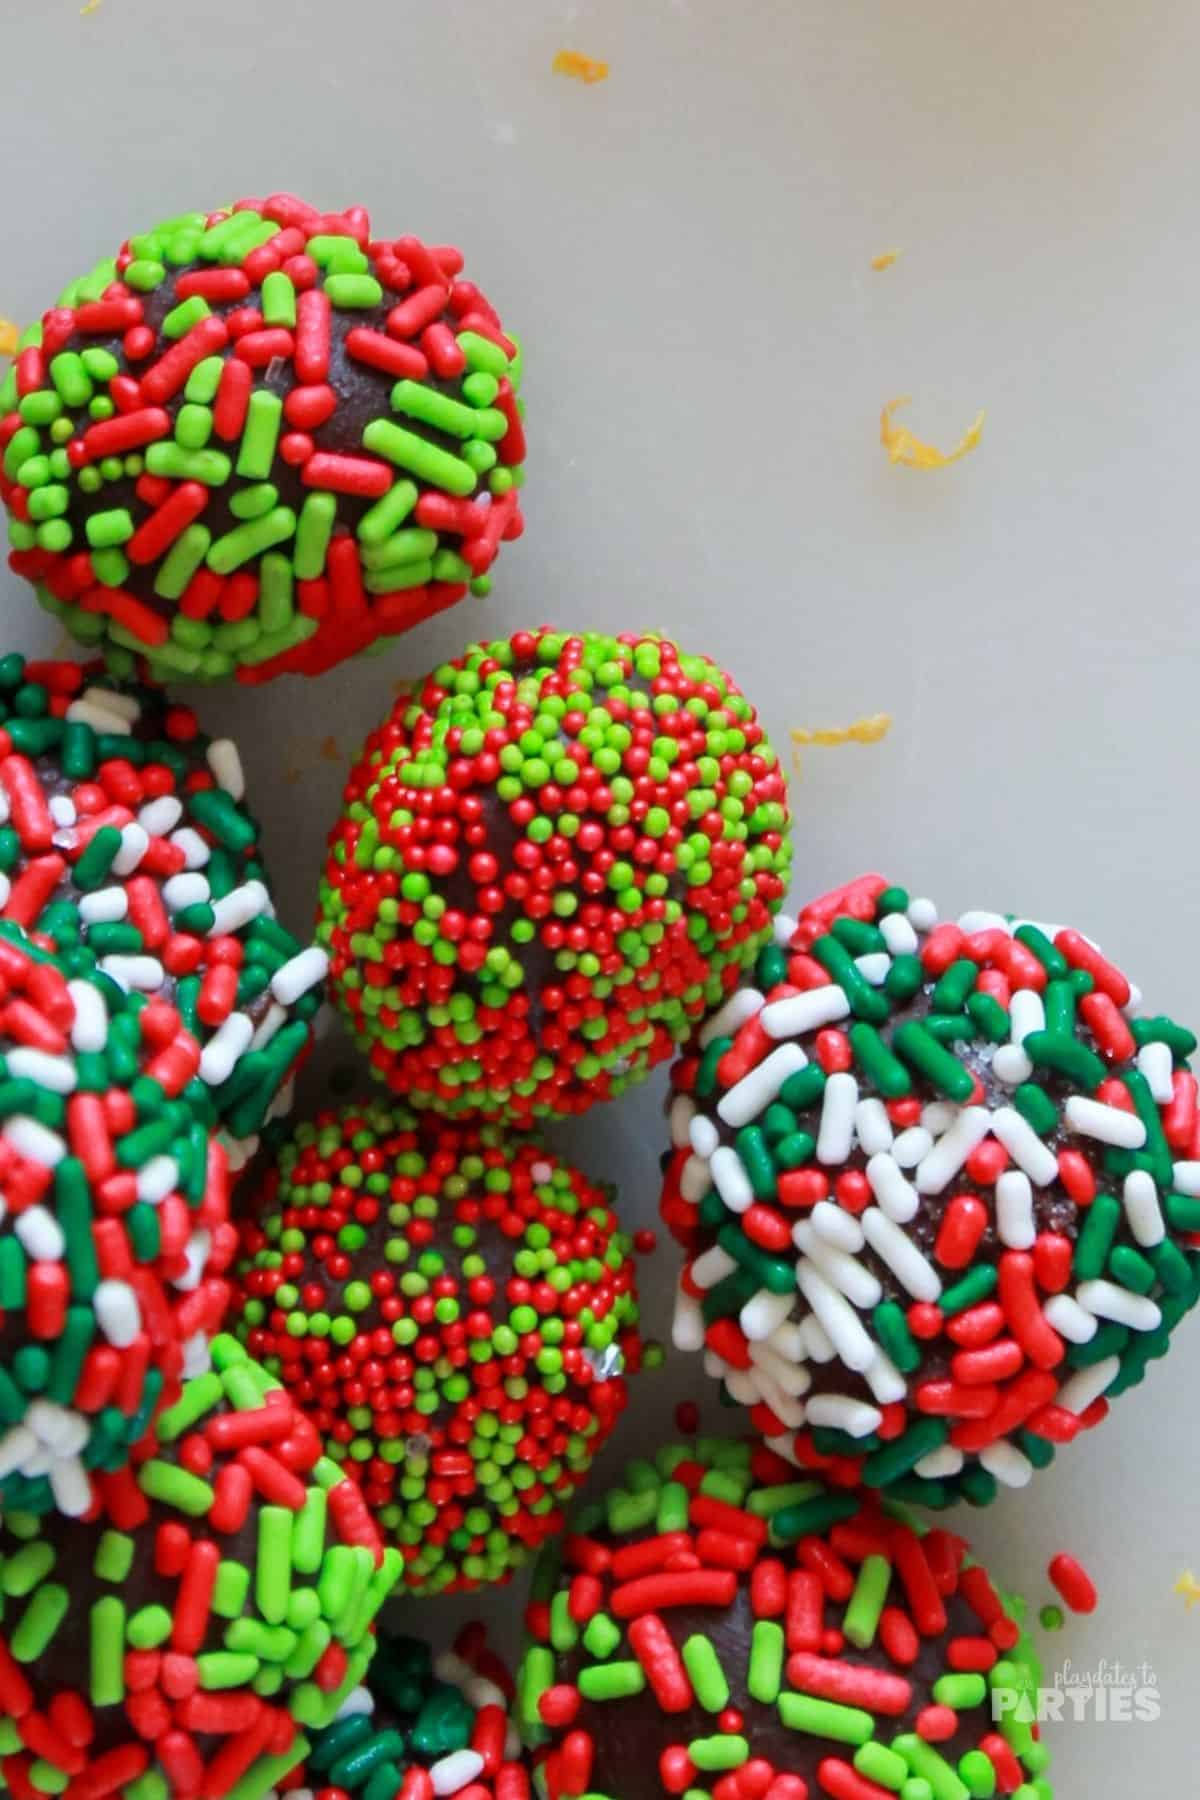 A pile of dark chocolate truffles made with liquor and coated in red and green sprinkles.